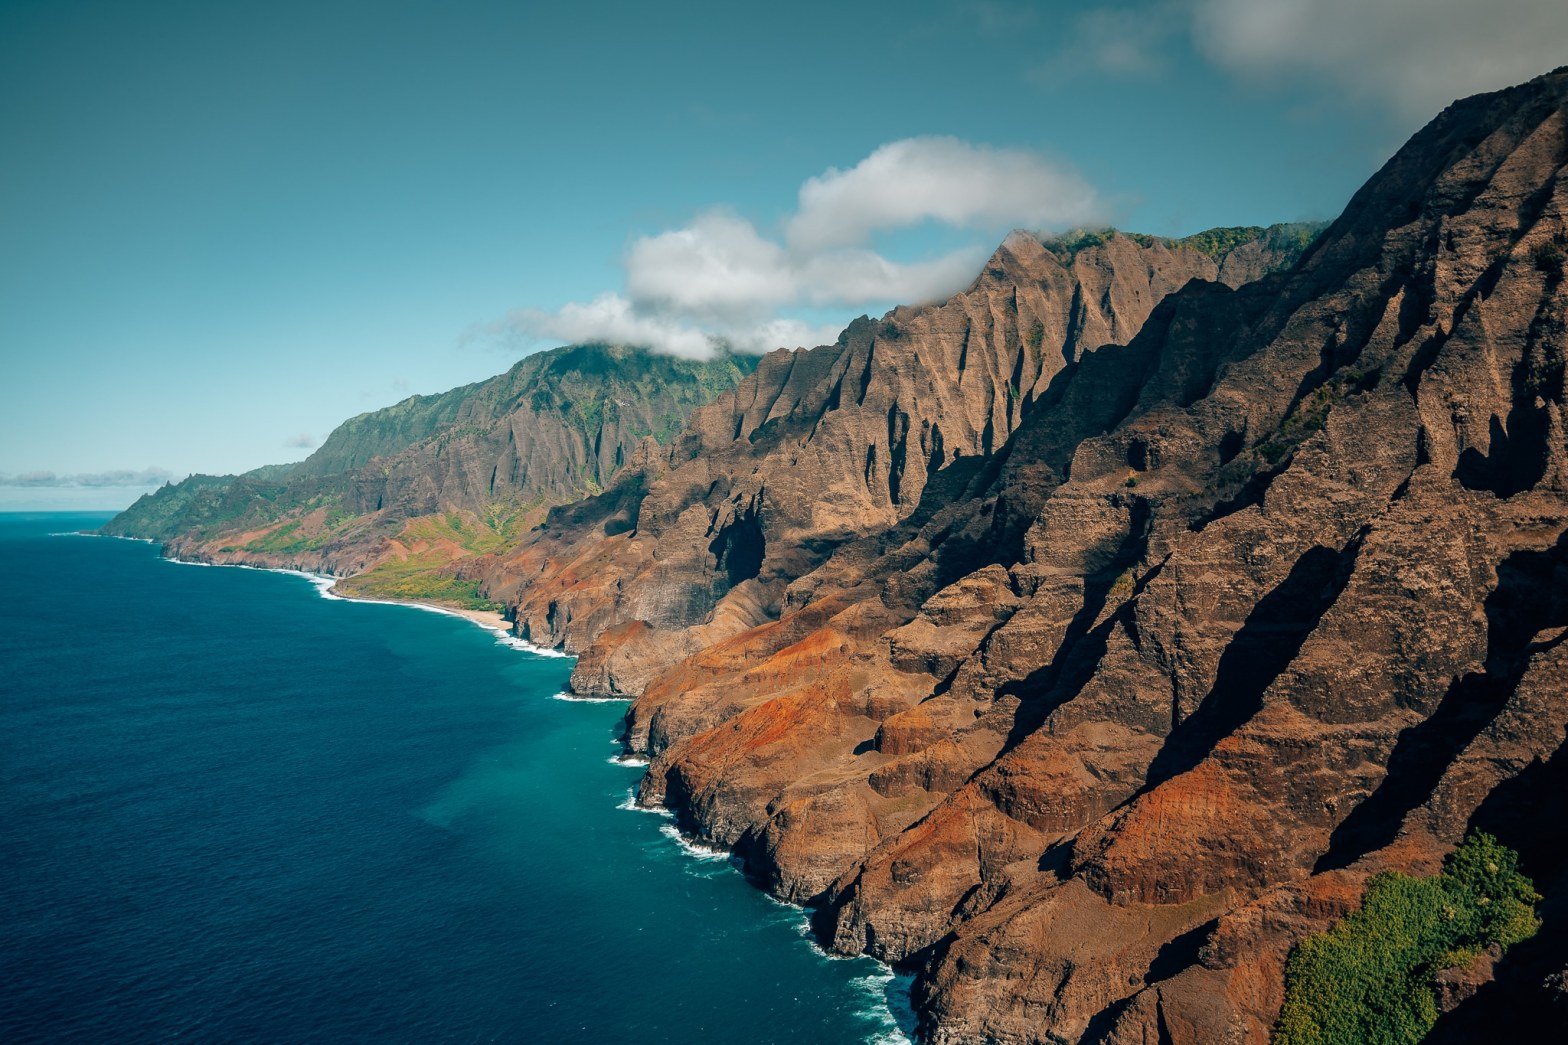 View of Kauai's famous NaPali Coast from in a helicopter, with the ocean off to the left and the coastline to the right